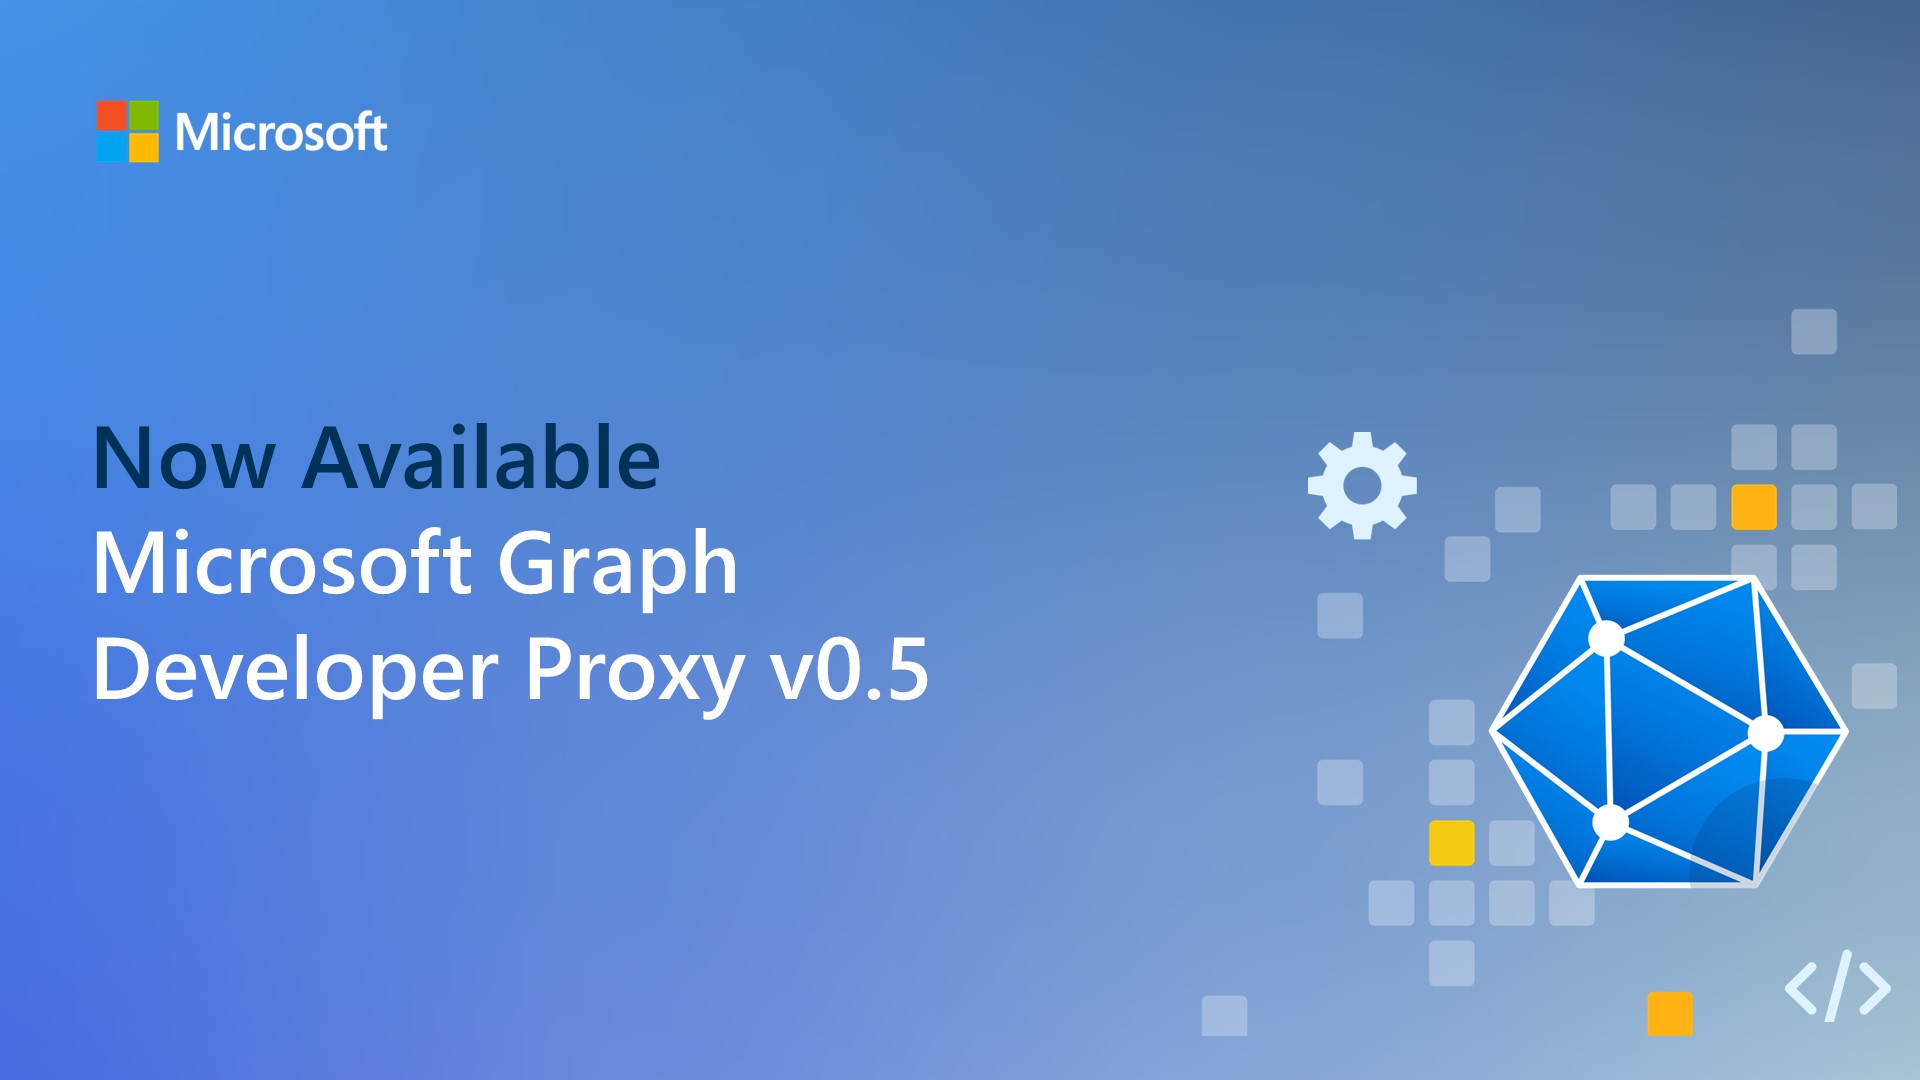 Microsoft Graph Developer Proxy v0.5 with execution summary and recording mode